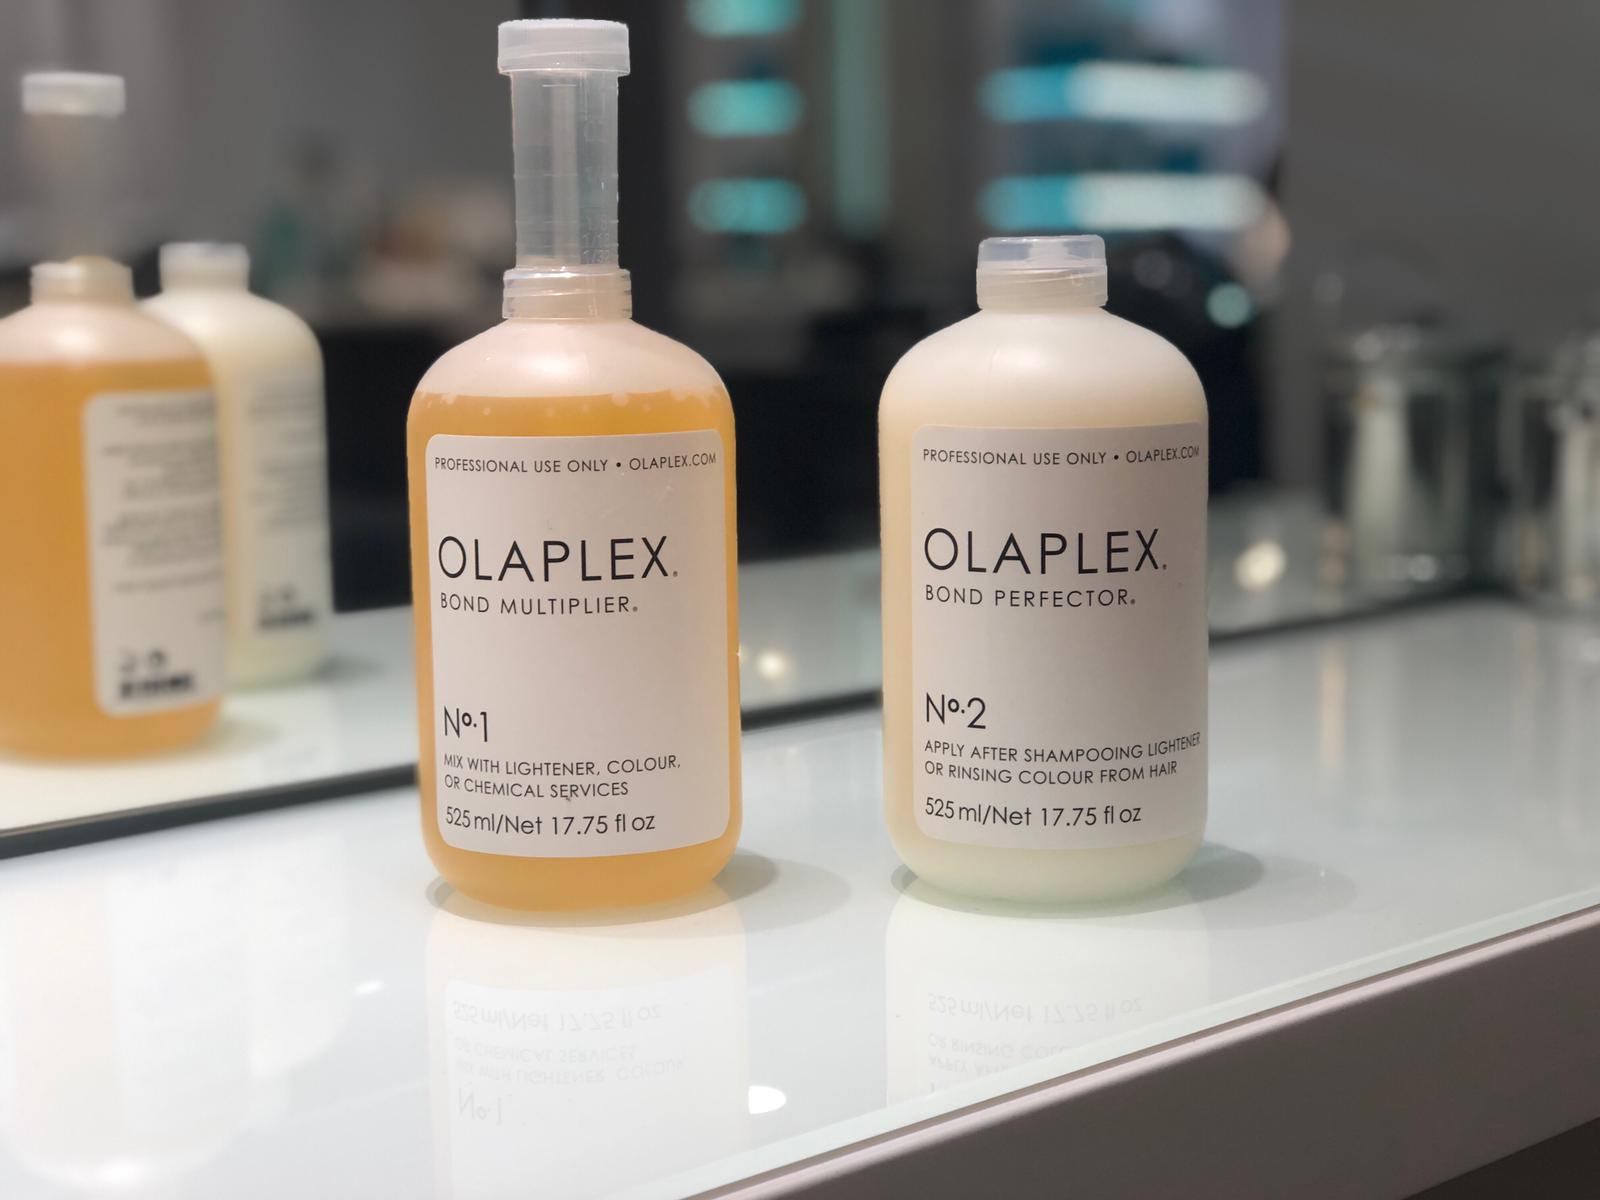 Olaplex Barcelona Treatment: What it is and what it is for